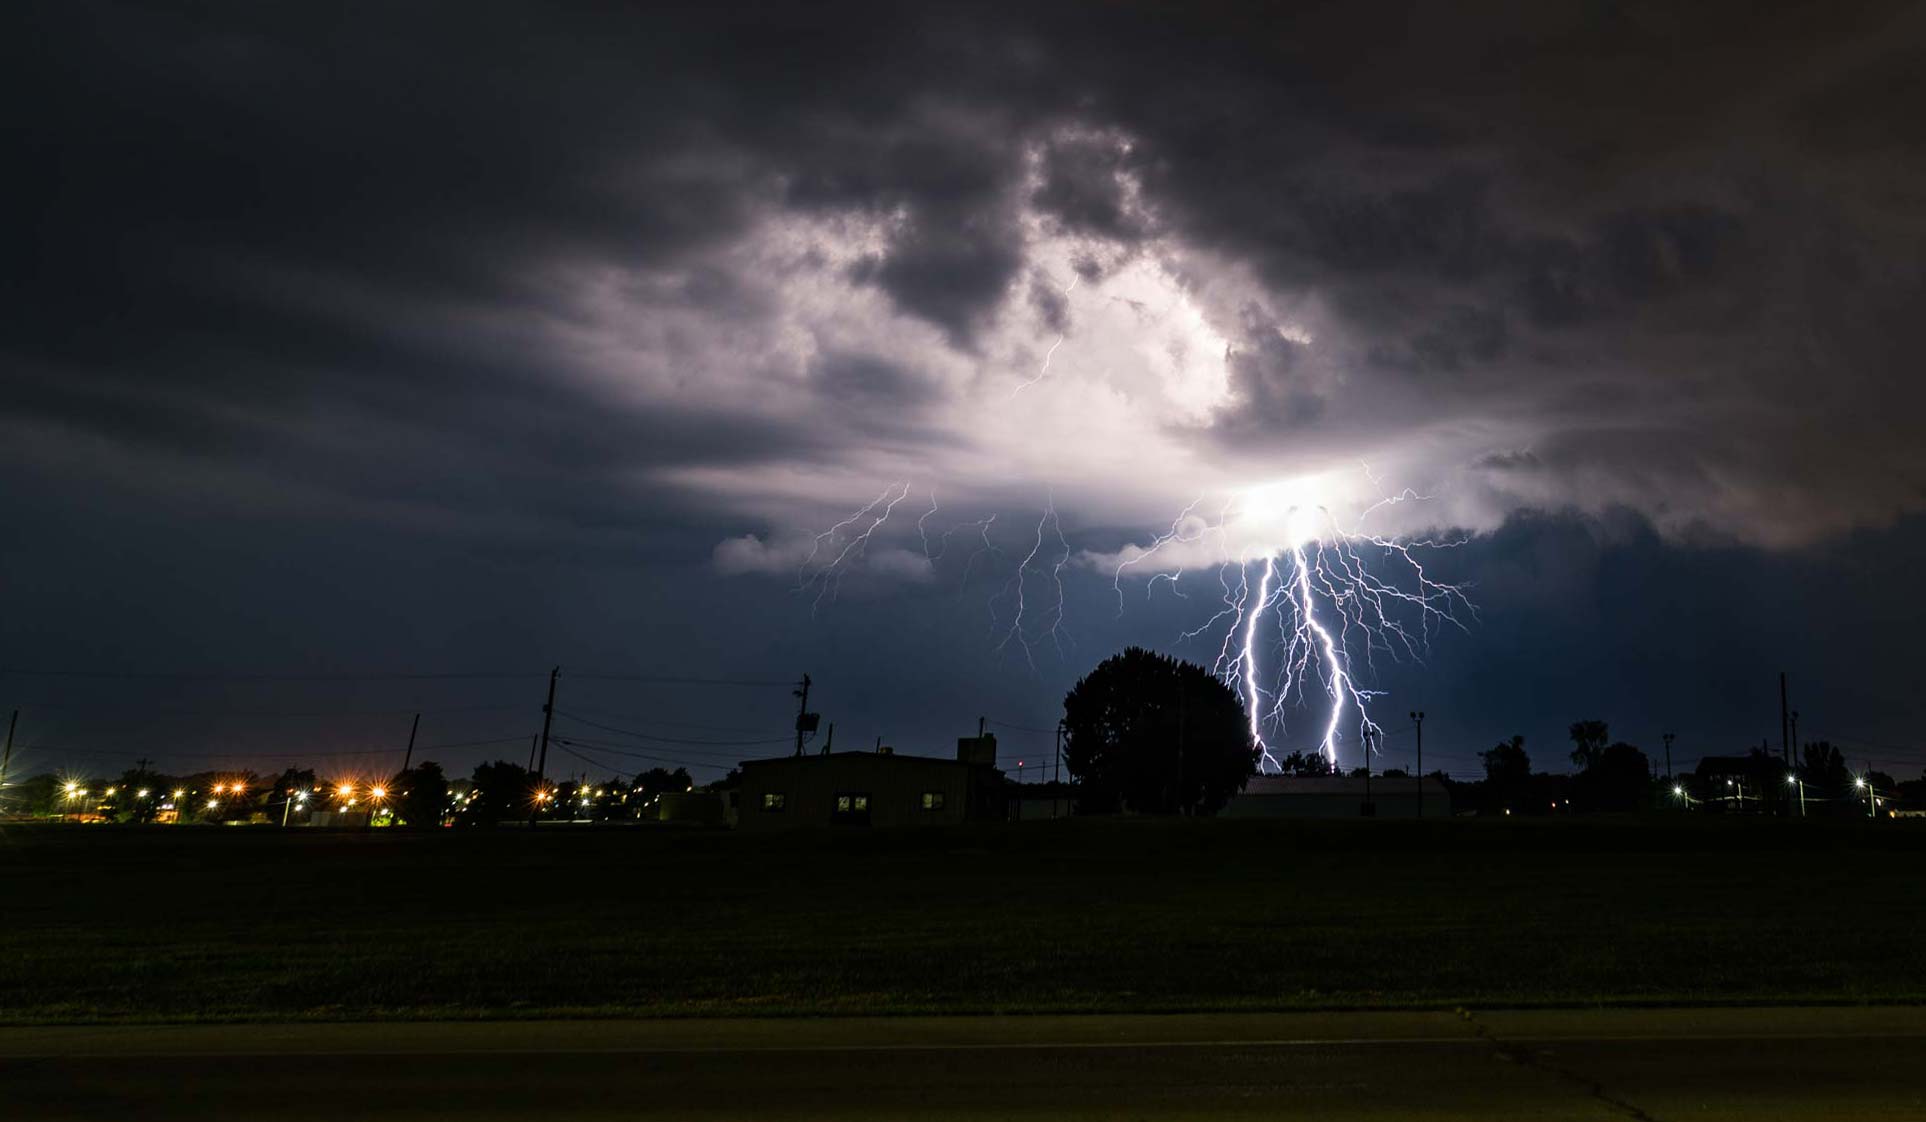 Lightning strikes at night in distance of rural Midwest town